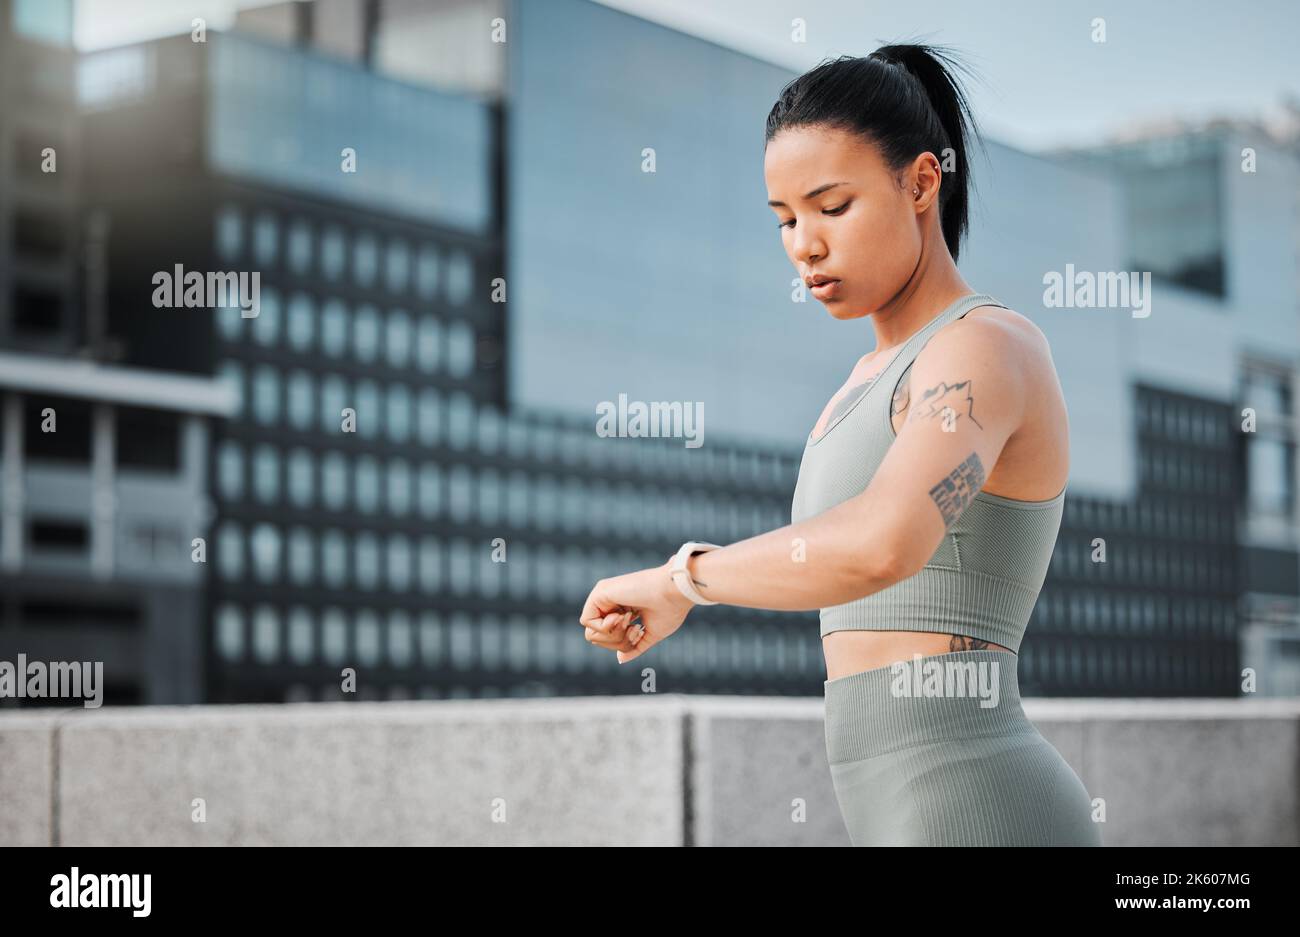 Young hispanic fit female athlete with tattoos looking serious while checking the time on her watch to track her progress while taking a break from Stock Photo